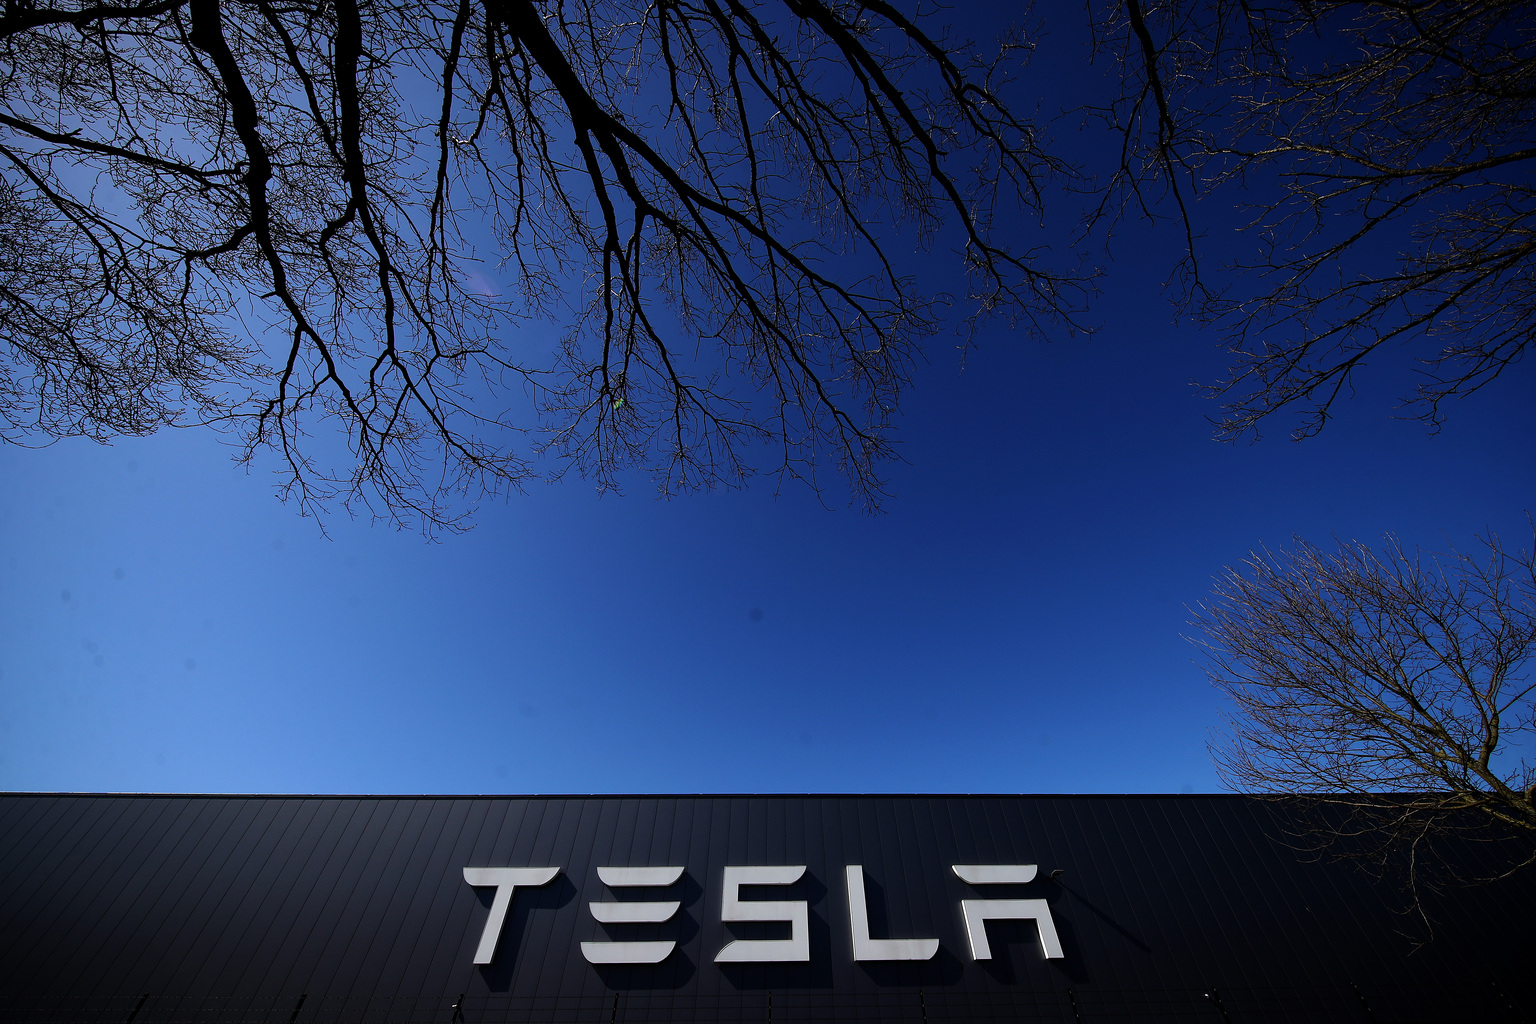 Tesla Assembly Plant In Tilburg Reported To Cease Production